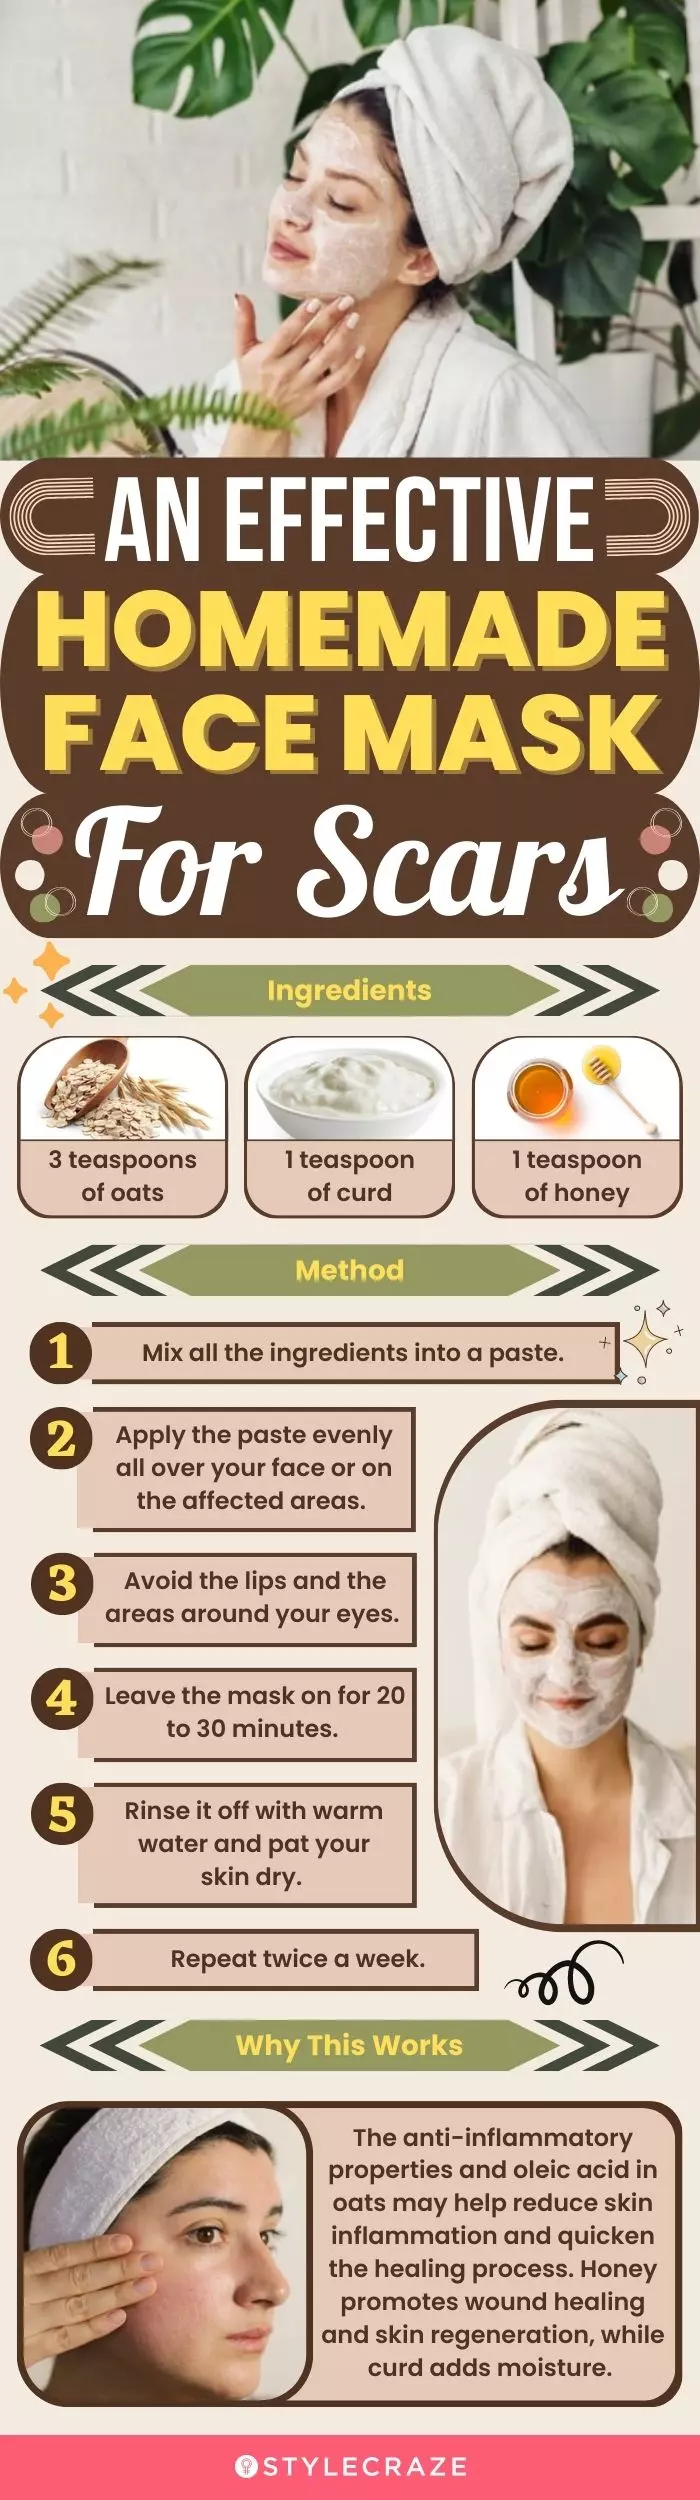 an effective homemade face mask for scars (infographic)